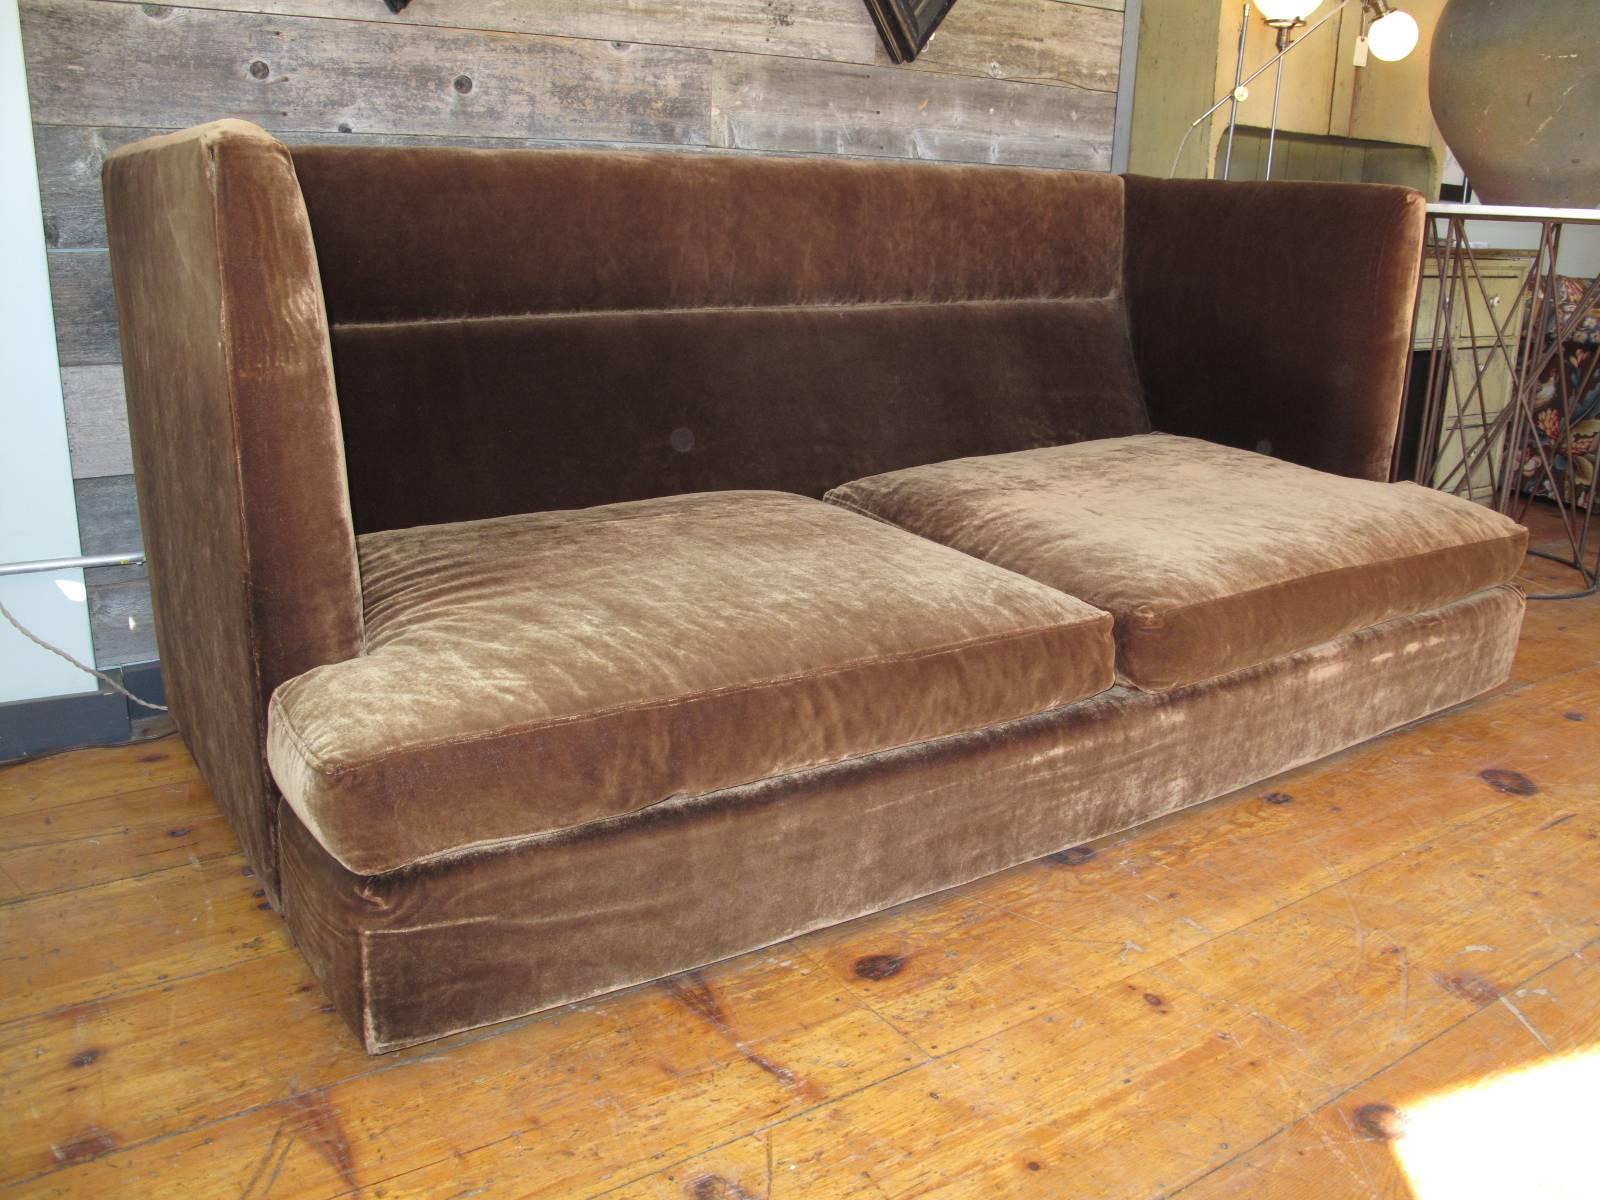 Rare and dramatic shelter sofa designed by Milo Baughman for Thayer Coggin in the 1970s. Original tag on underside. Likely original chocolate brown velvet mohair upholstery. 

Can easily be taken apart in two pieces to fit through doorways.